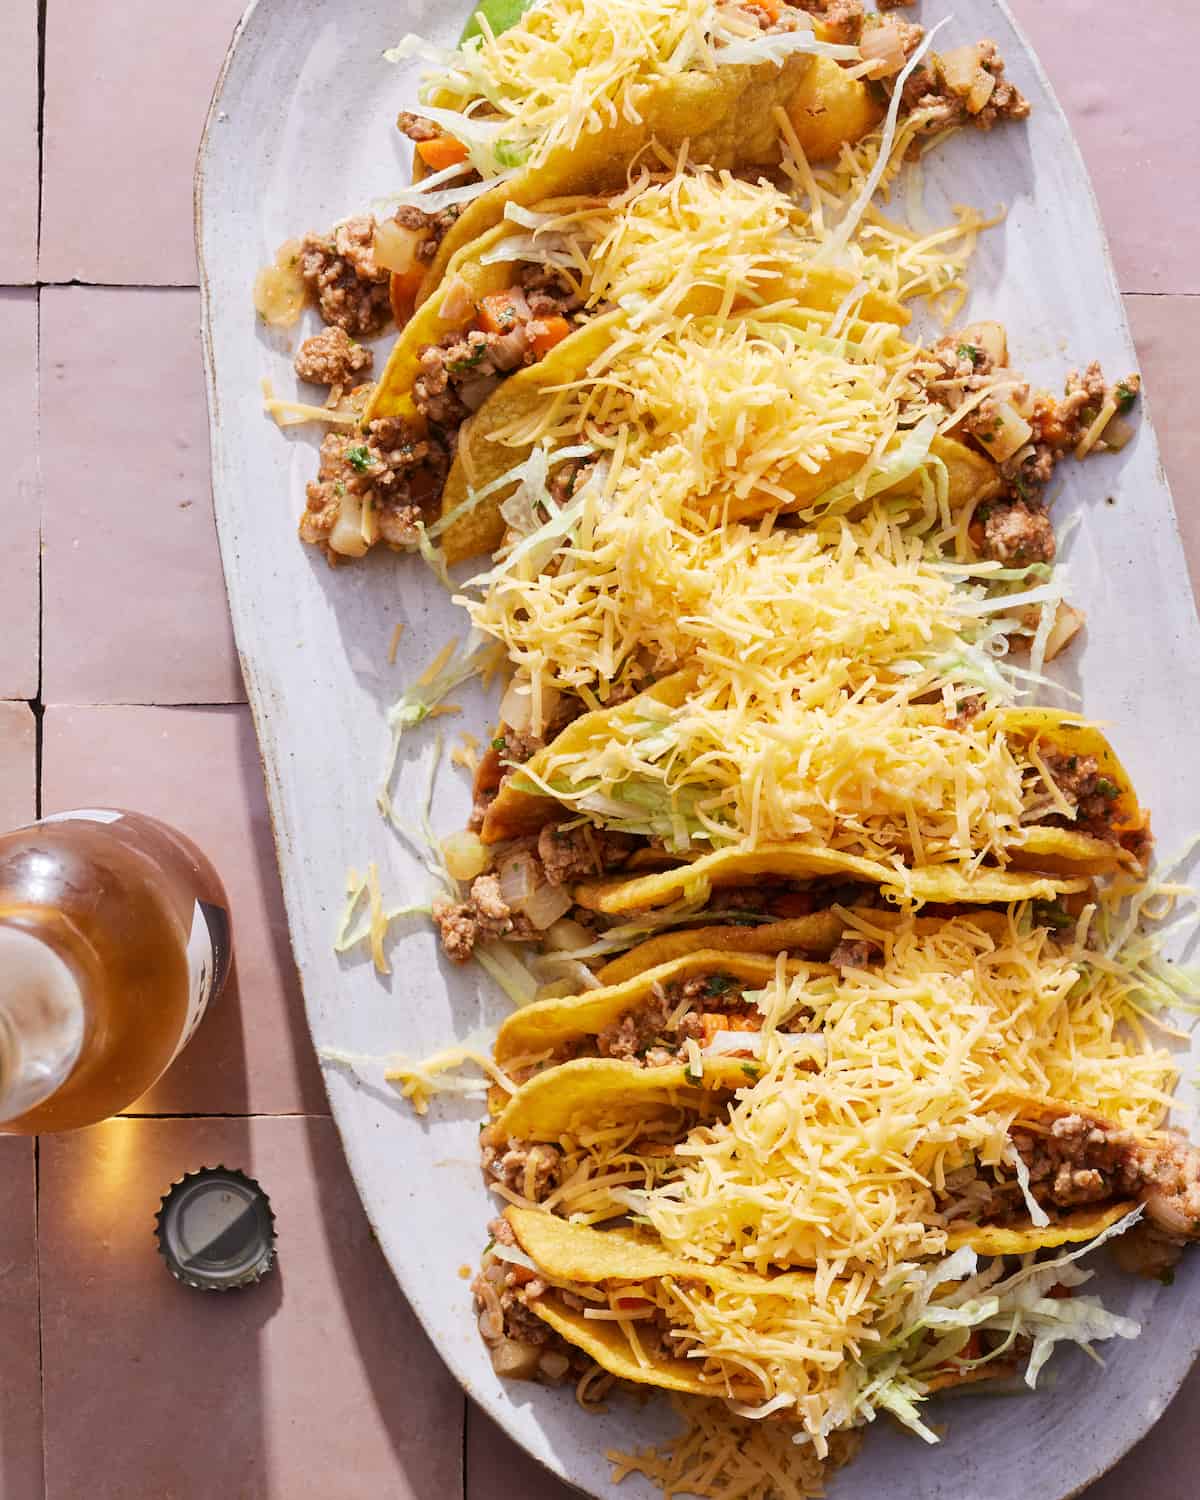 An oval white platter with picadillo hard shell tacos topped with shredded cheese, placed on a tiled surface, with an open beverage in a bottle on the side.